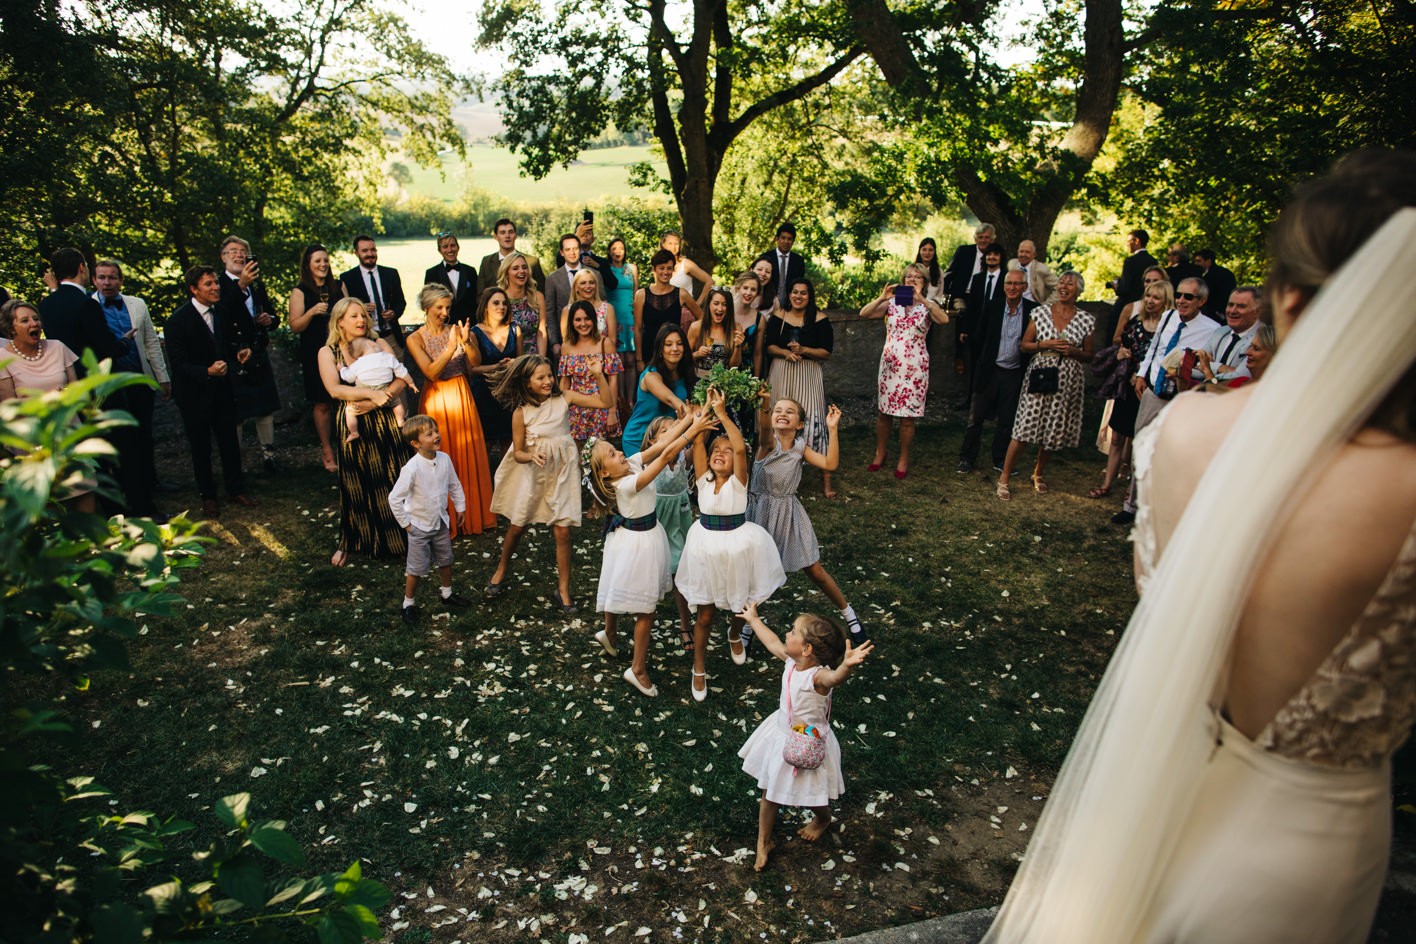 Flower girls try and catch bouquet thrown by bride on lawn of chateau 